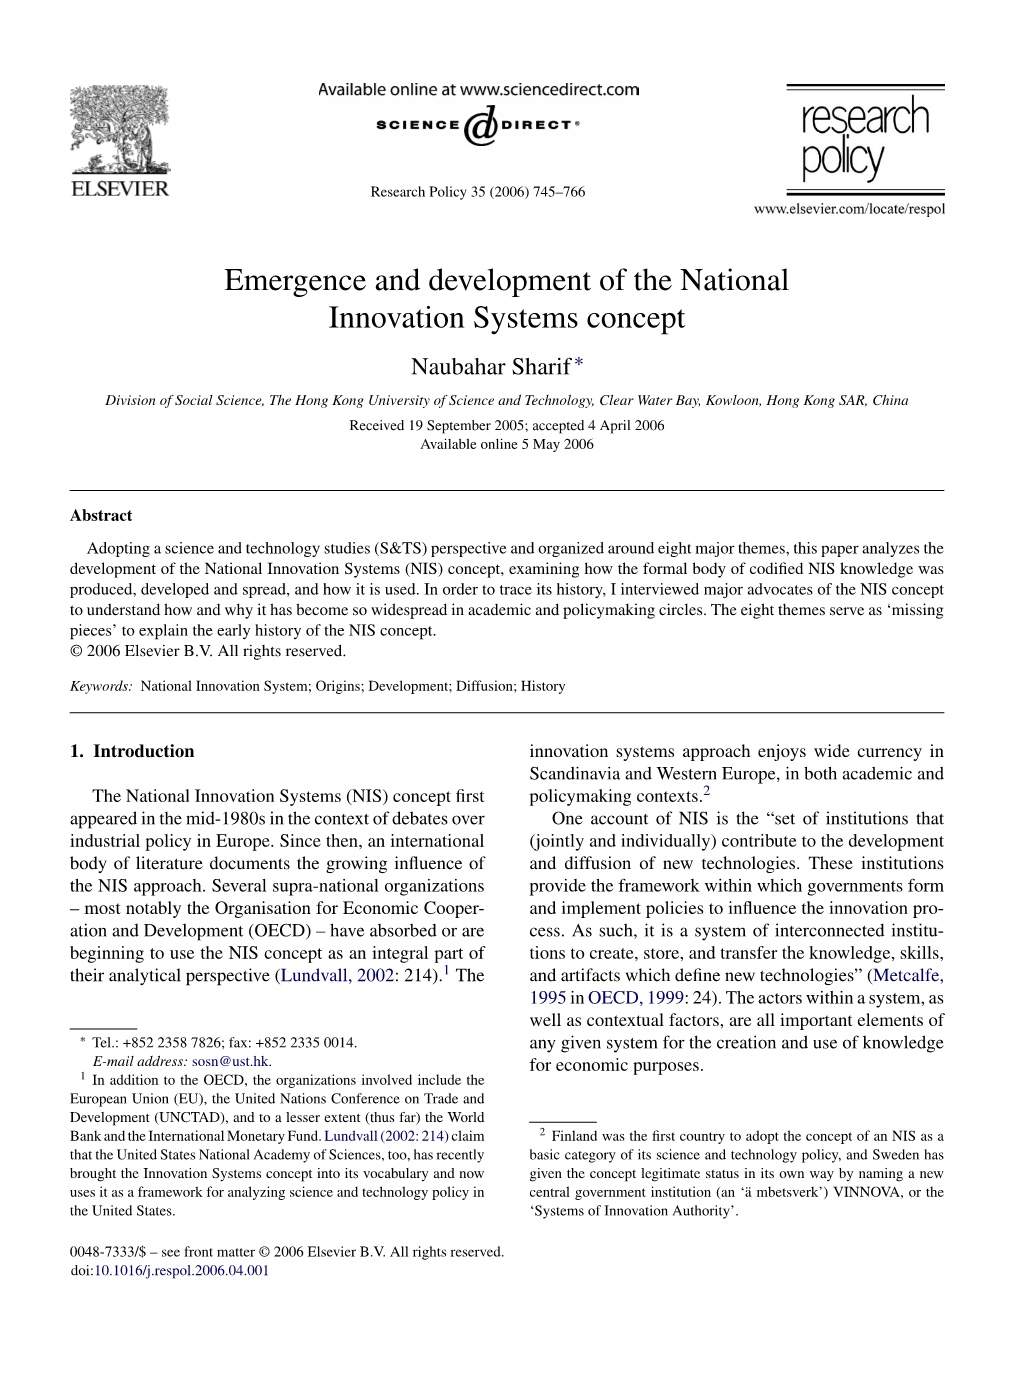 Emergence and Development of the National Innovation Systems Concept